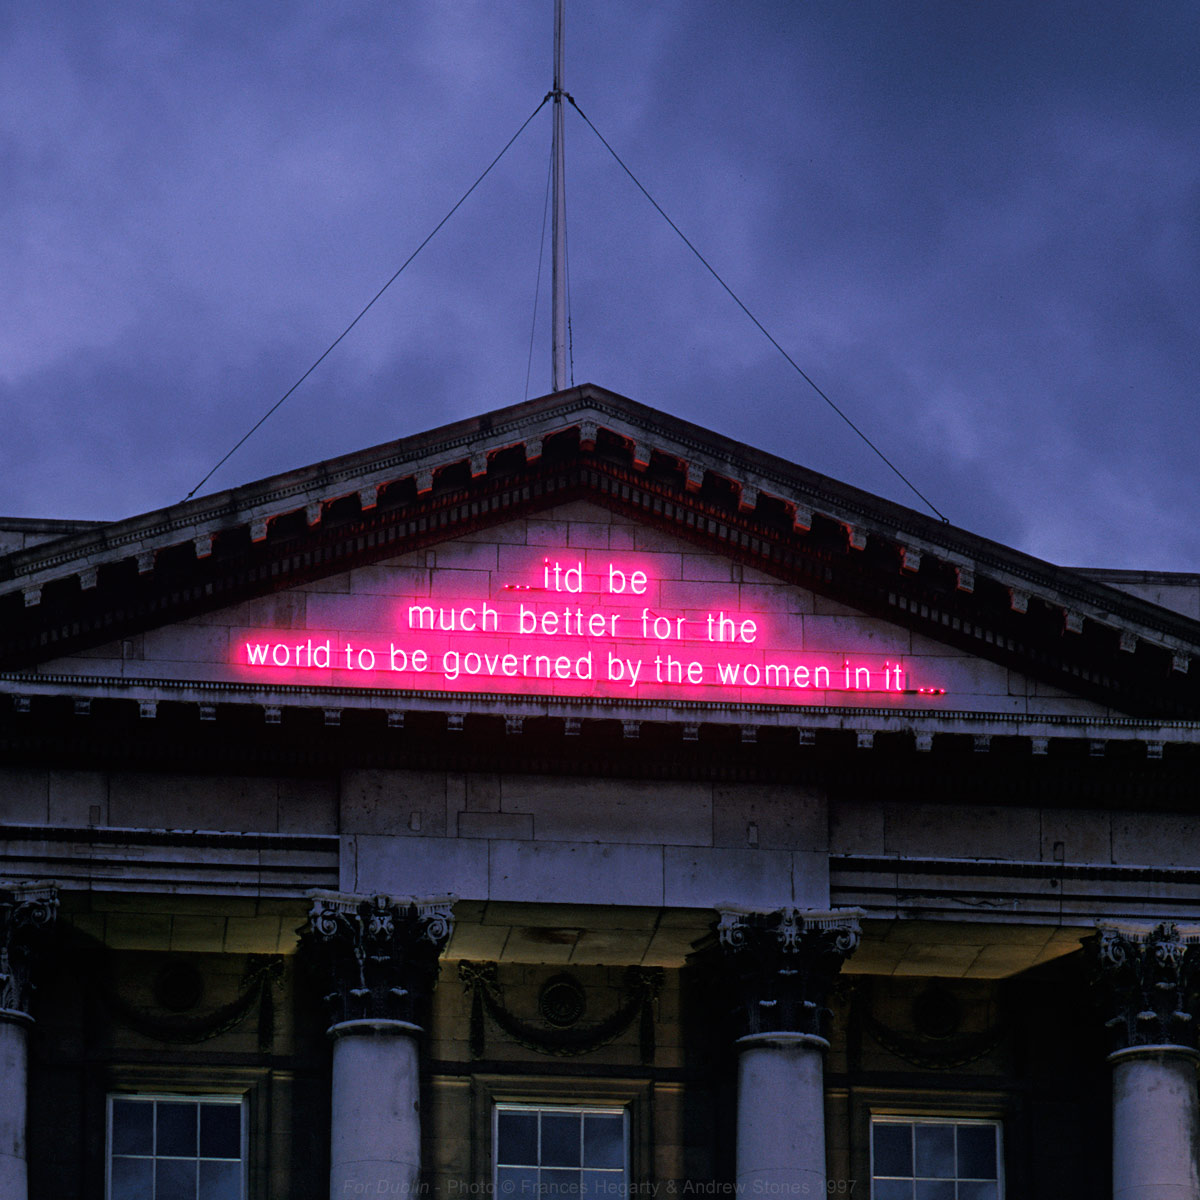 Hegarty & Stones - 'For Dublin' 1997 - nine manifestations in neon of James Joyce's Molly Bloom. View 1 of 14, City Hall, Parliament Street